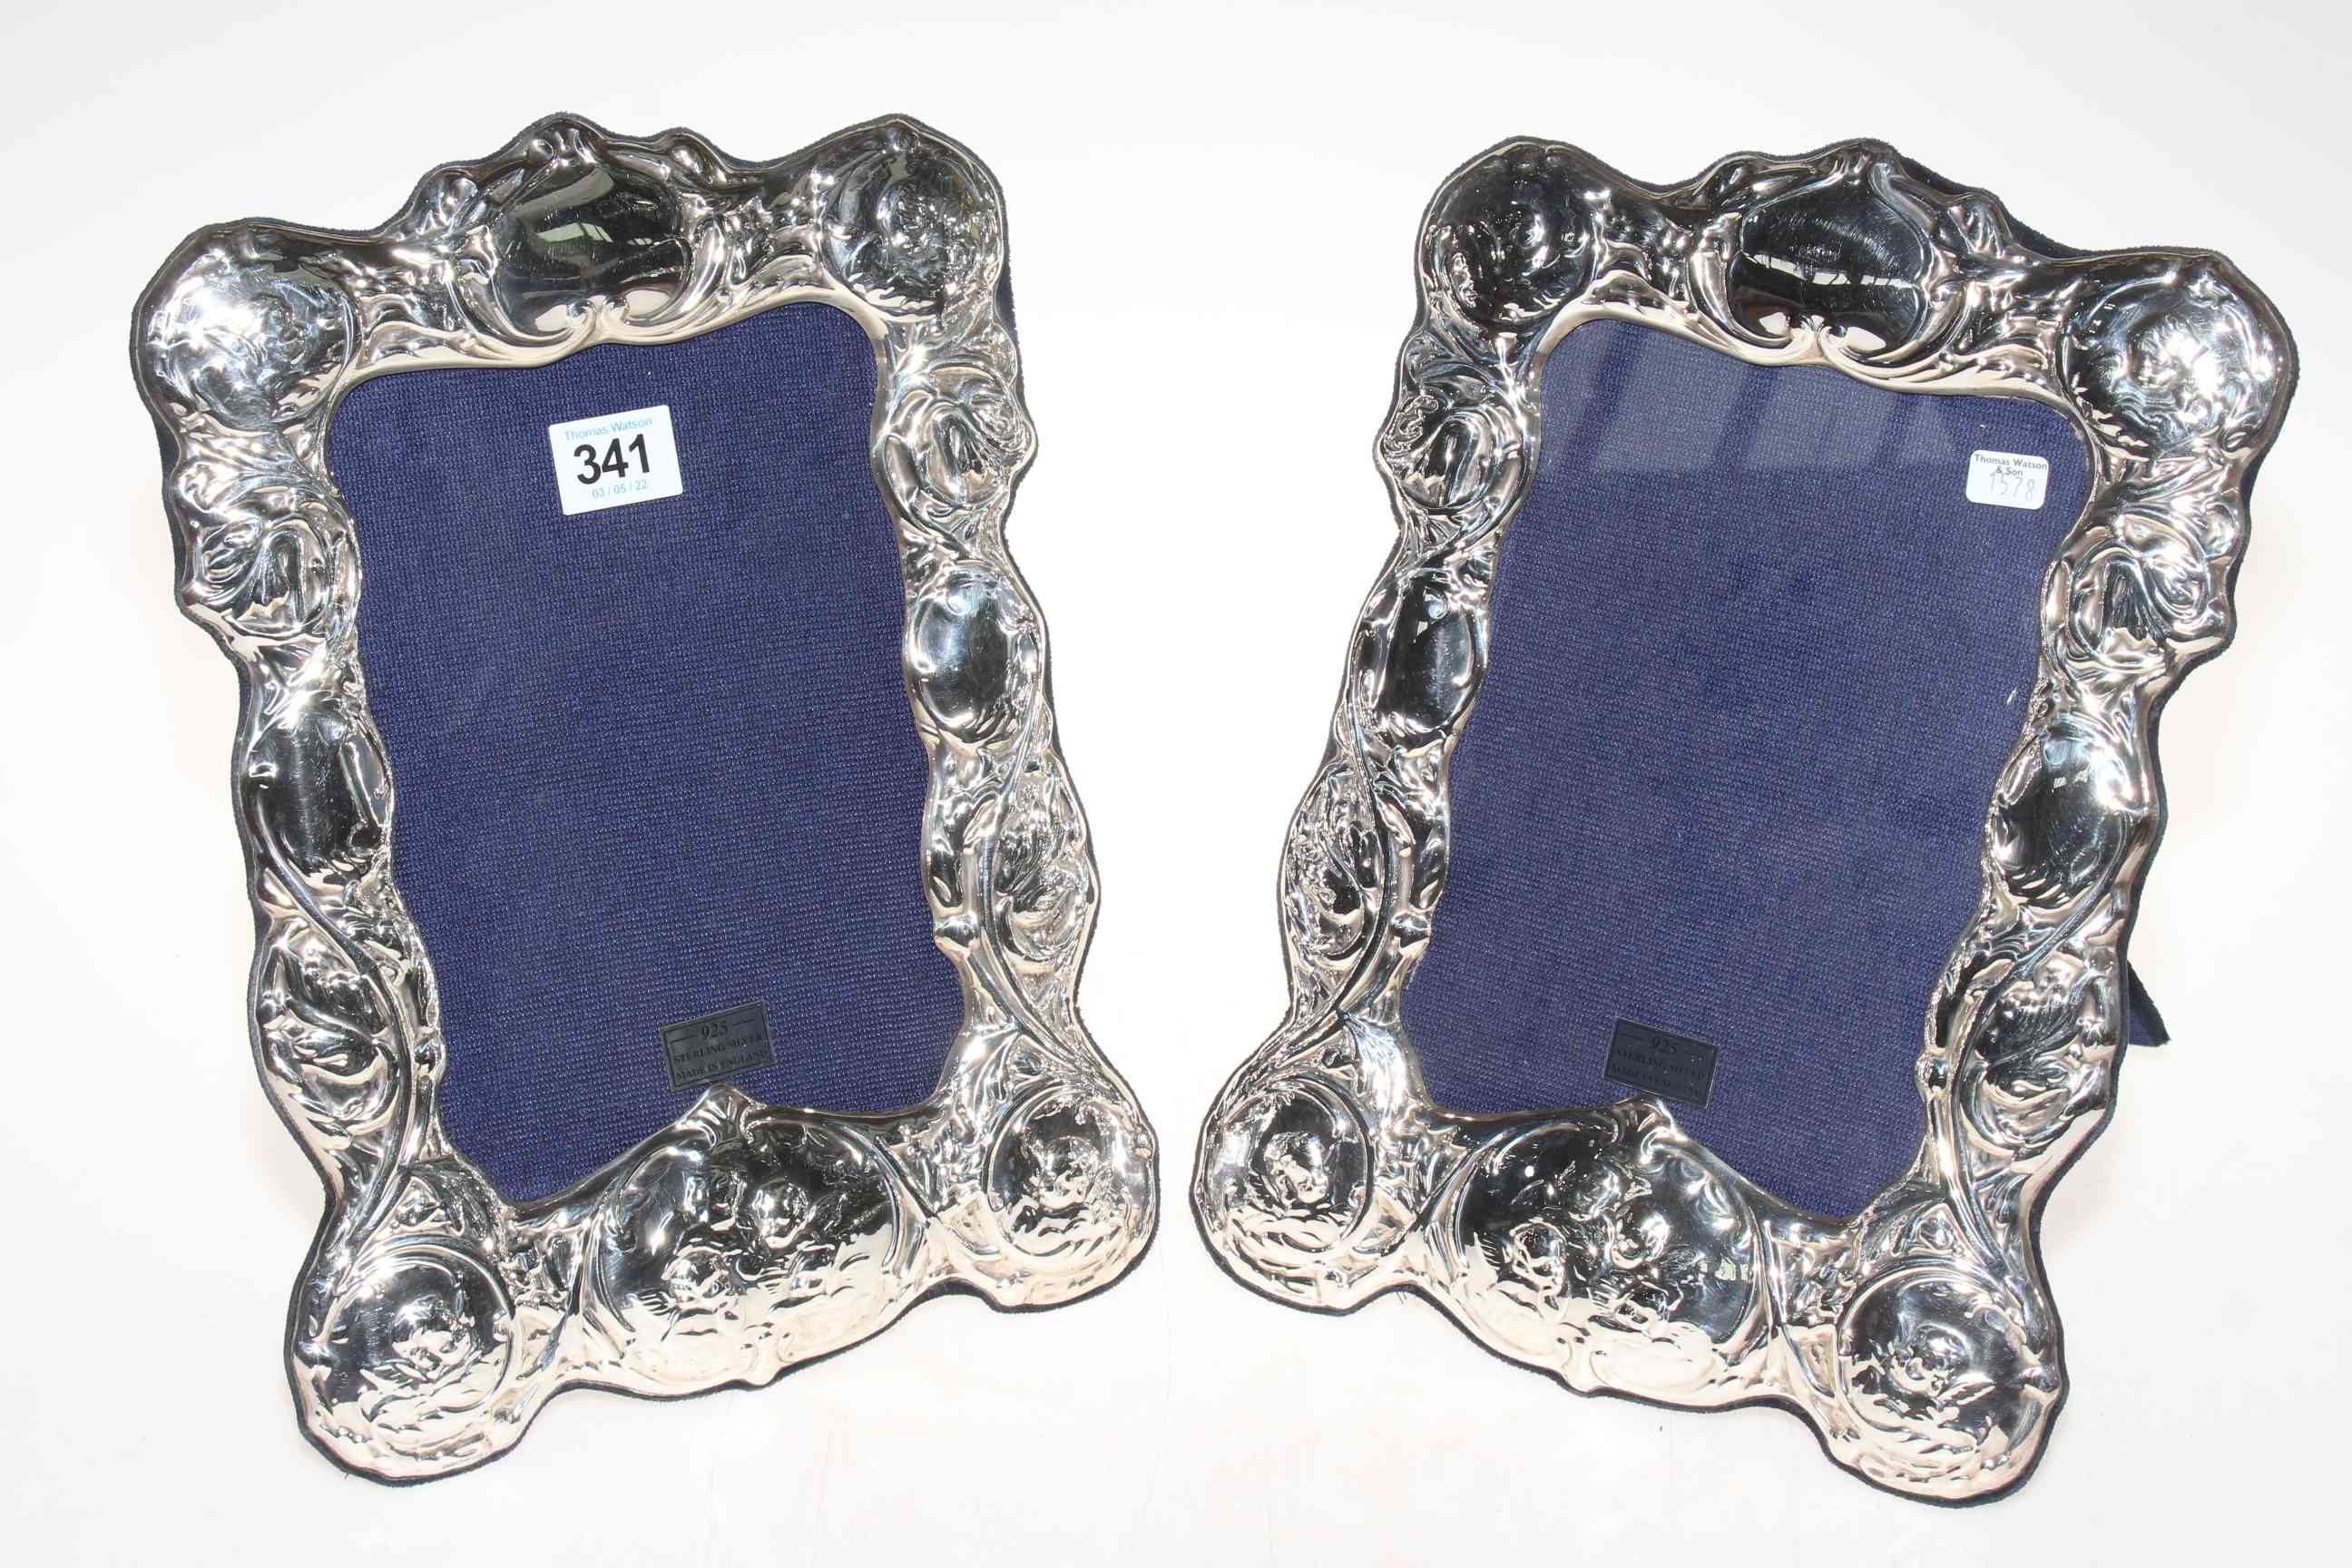 Pair of floral embossed Sterling silver photograph frames, image size 8x6 inches.